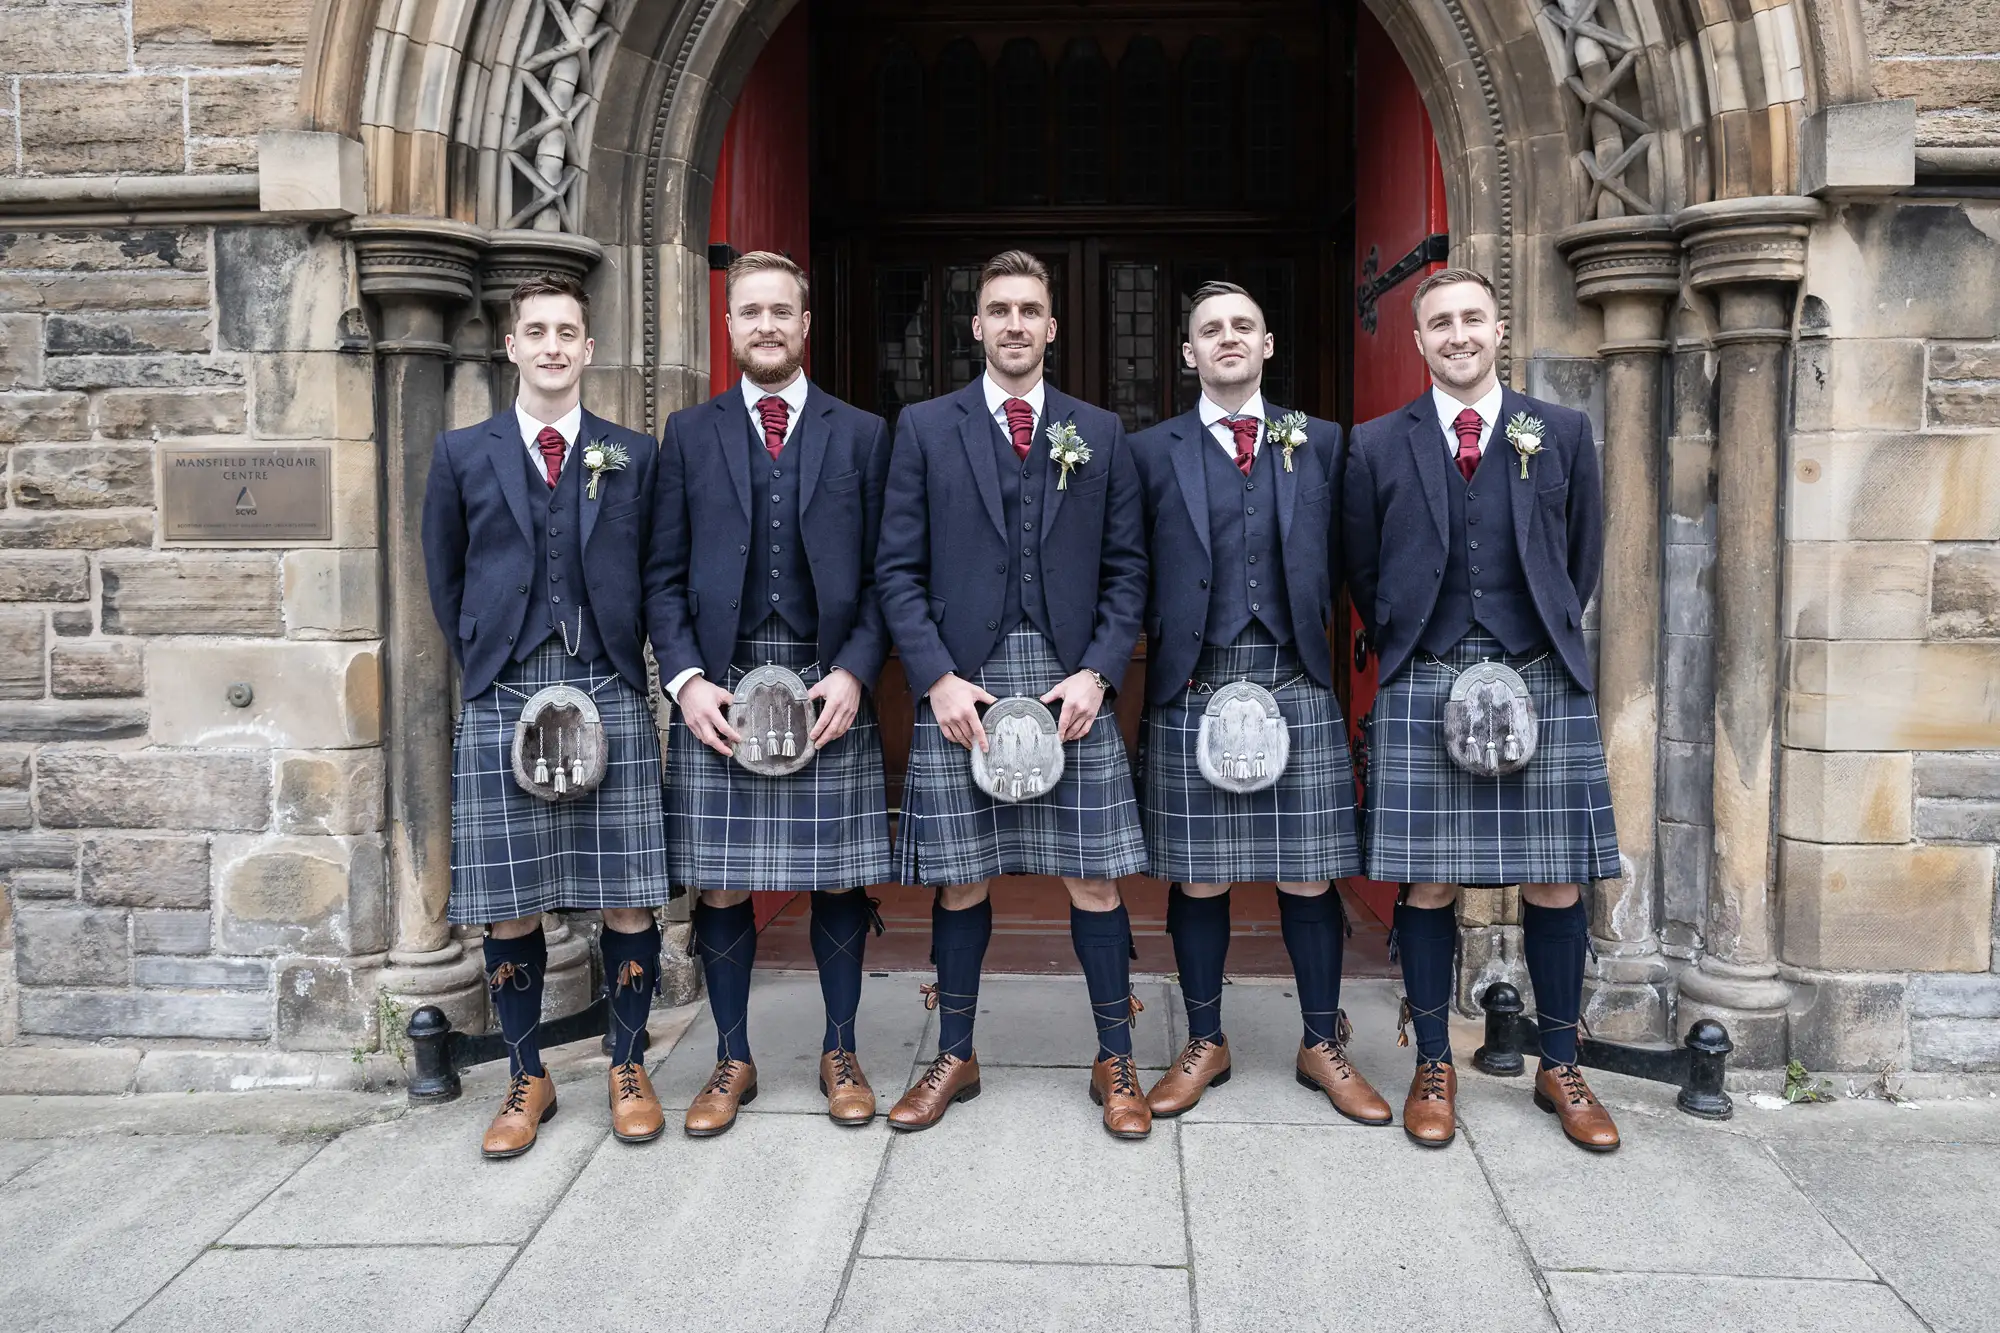 Five men in traditional scottish kilt attire standing in front of a church entrance, each holding a sporran and wearing a boutonniere.